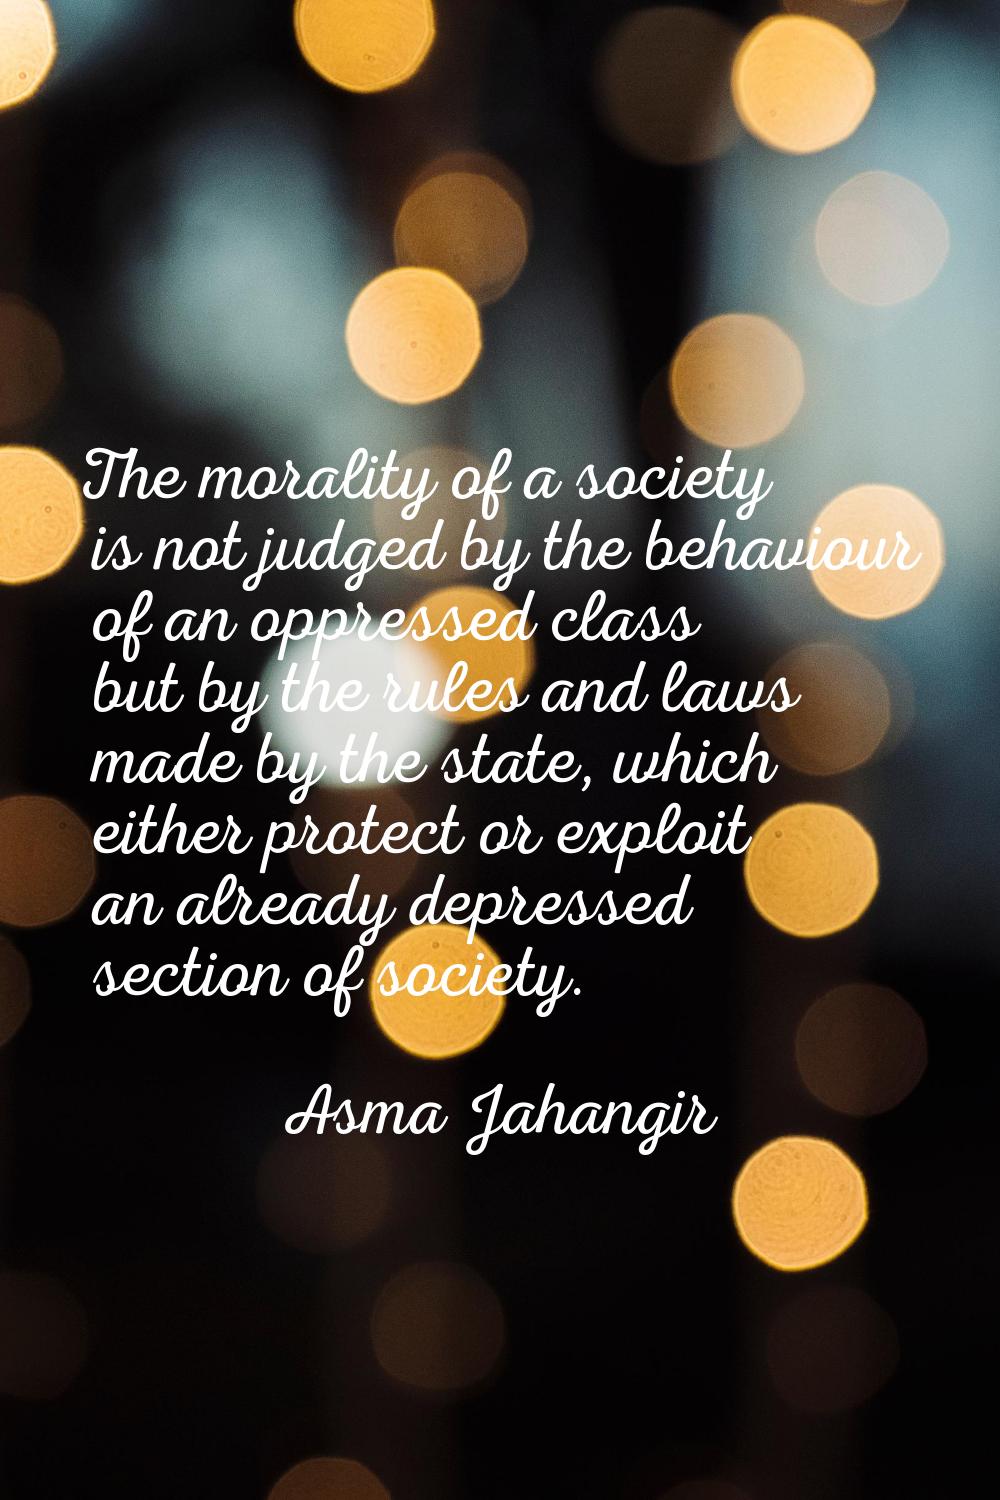 The morality of a society is not judged by the behaviour of an oppressed class but by the rules and